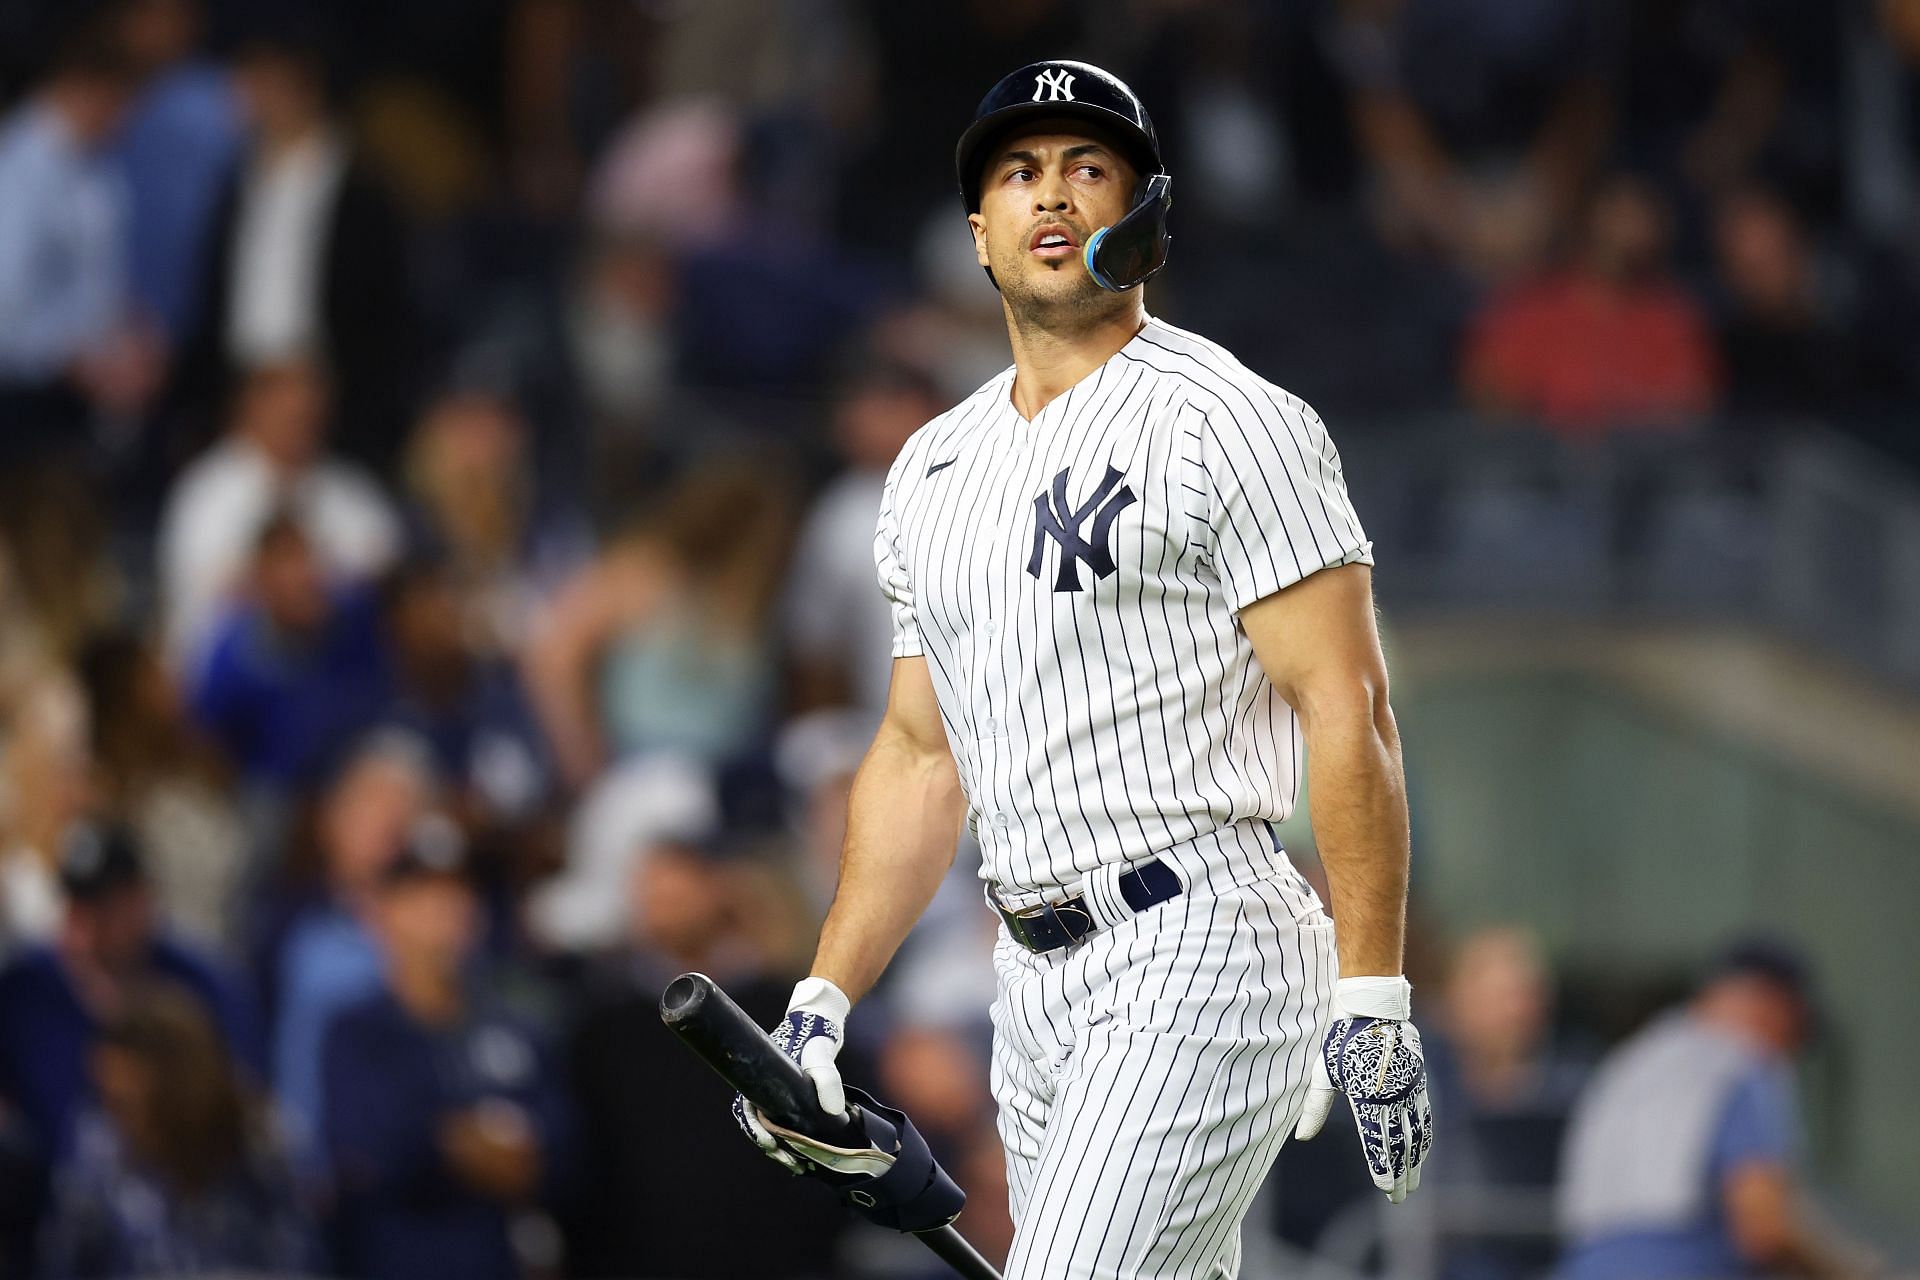 Giancarlo Stanton #27 of the New York Yankees reacts after striking out